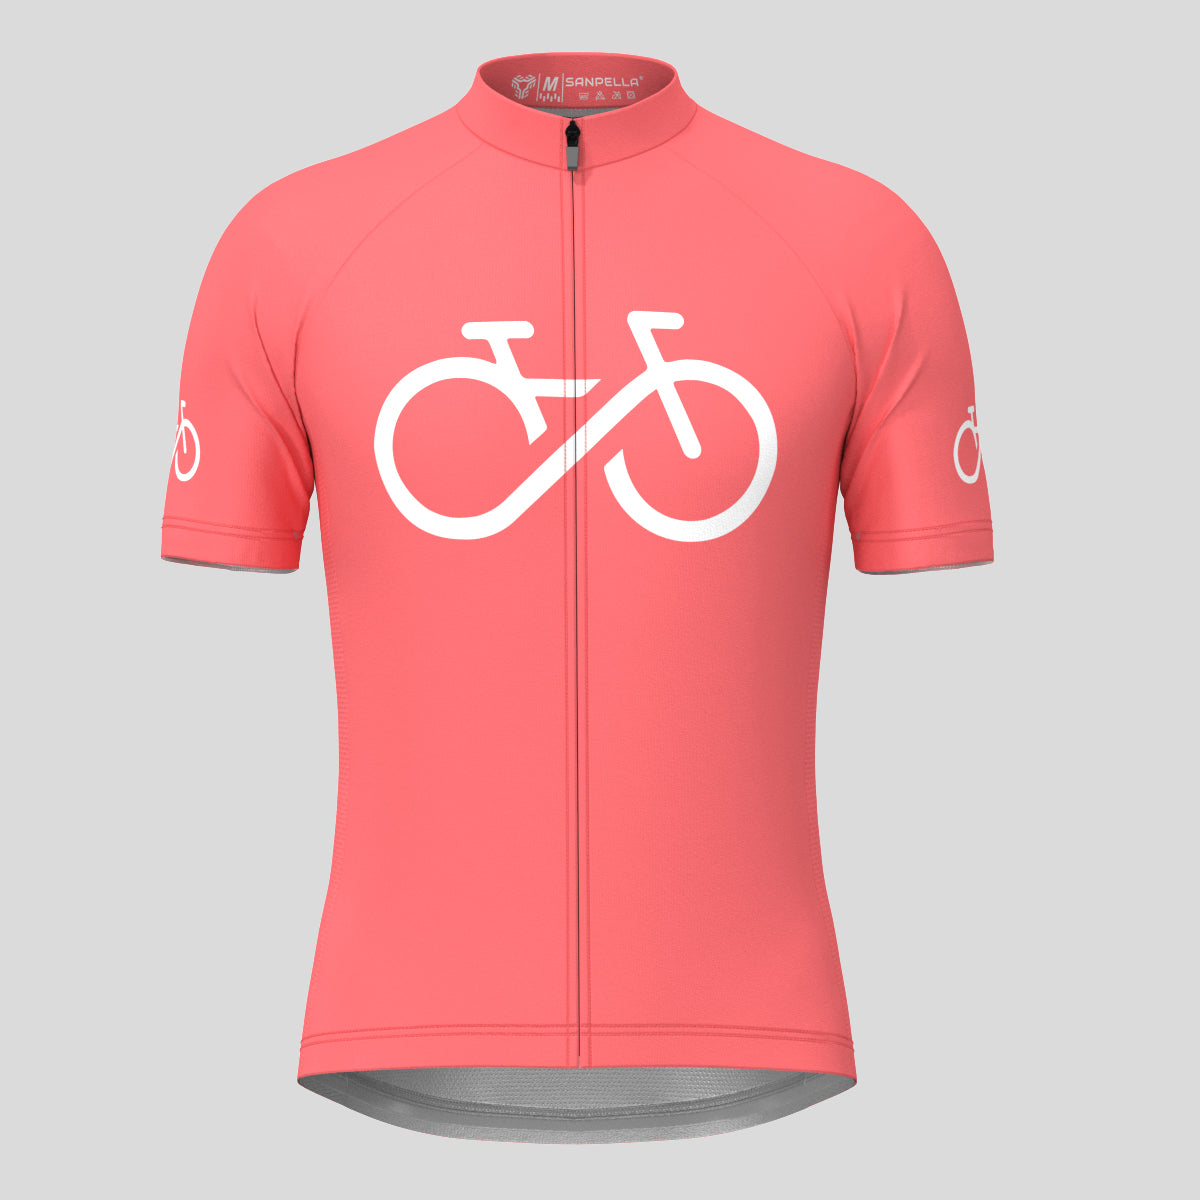 Bike Forever Men's Cycling Jersey -Guava